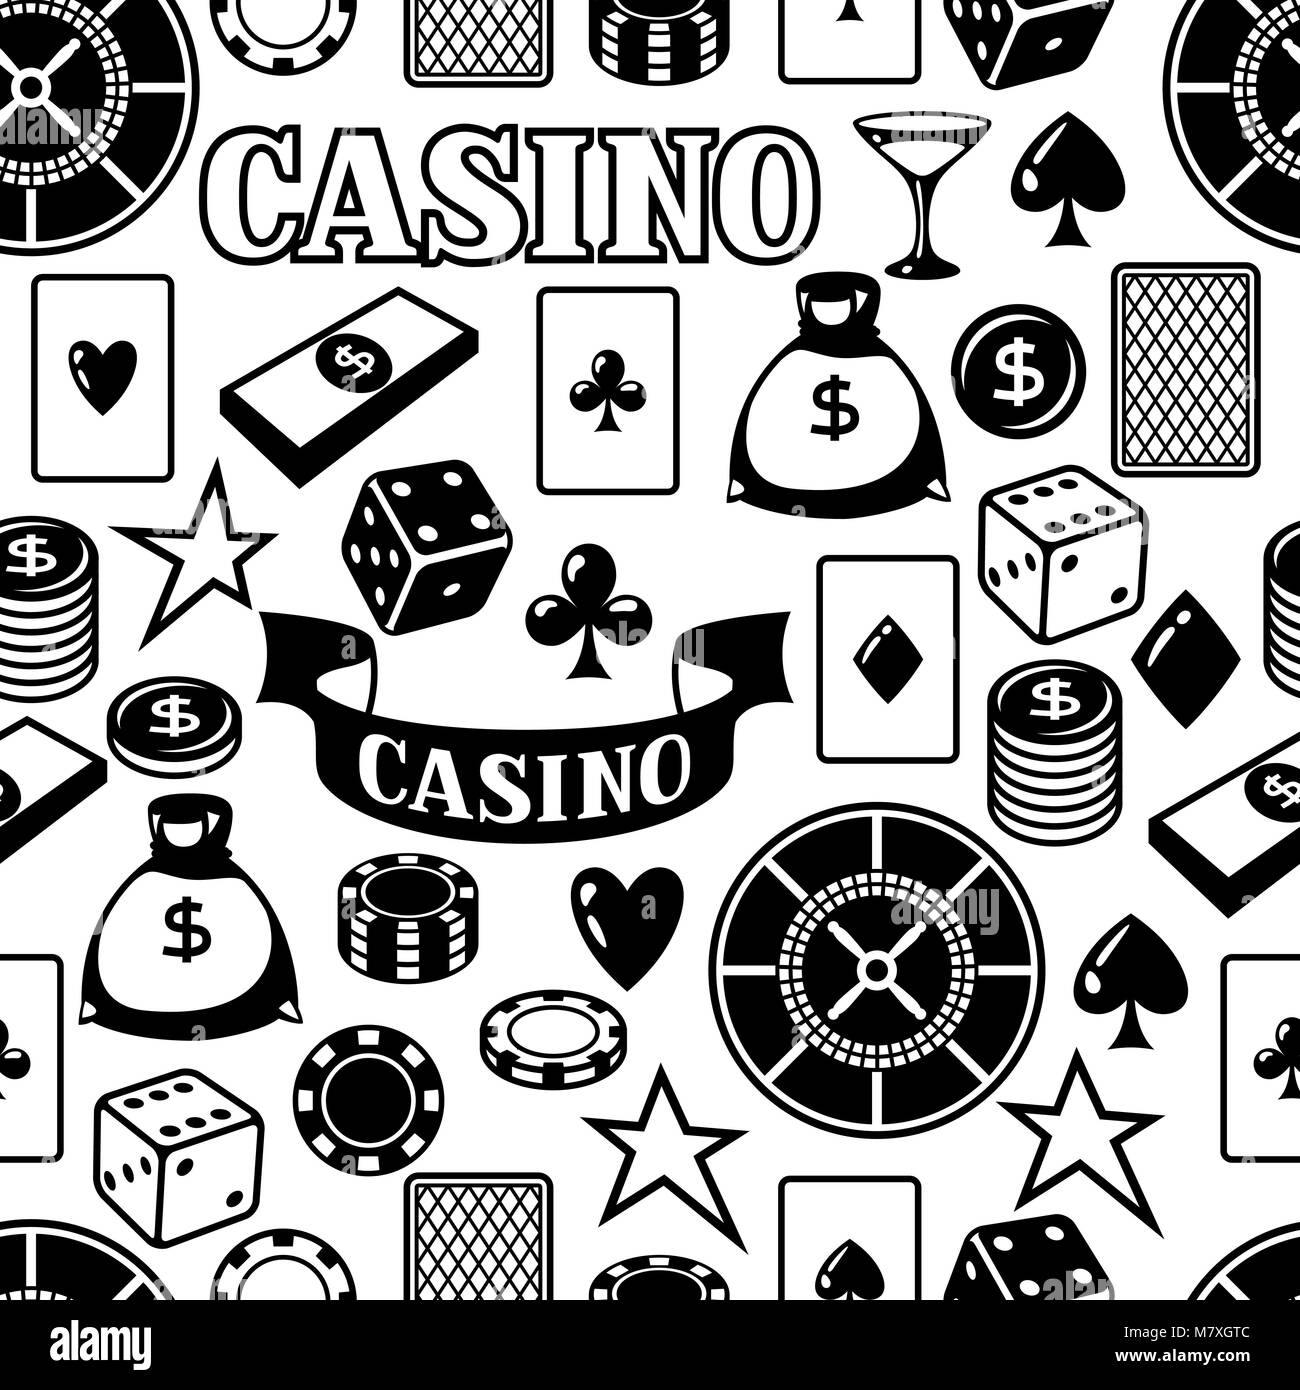 Casino gambling seamless pattern with game objects Stock Vector